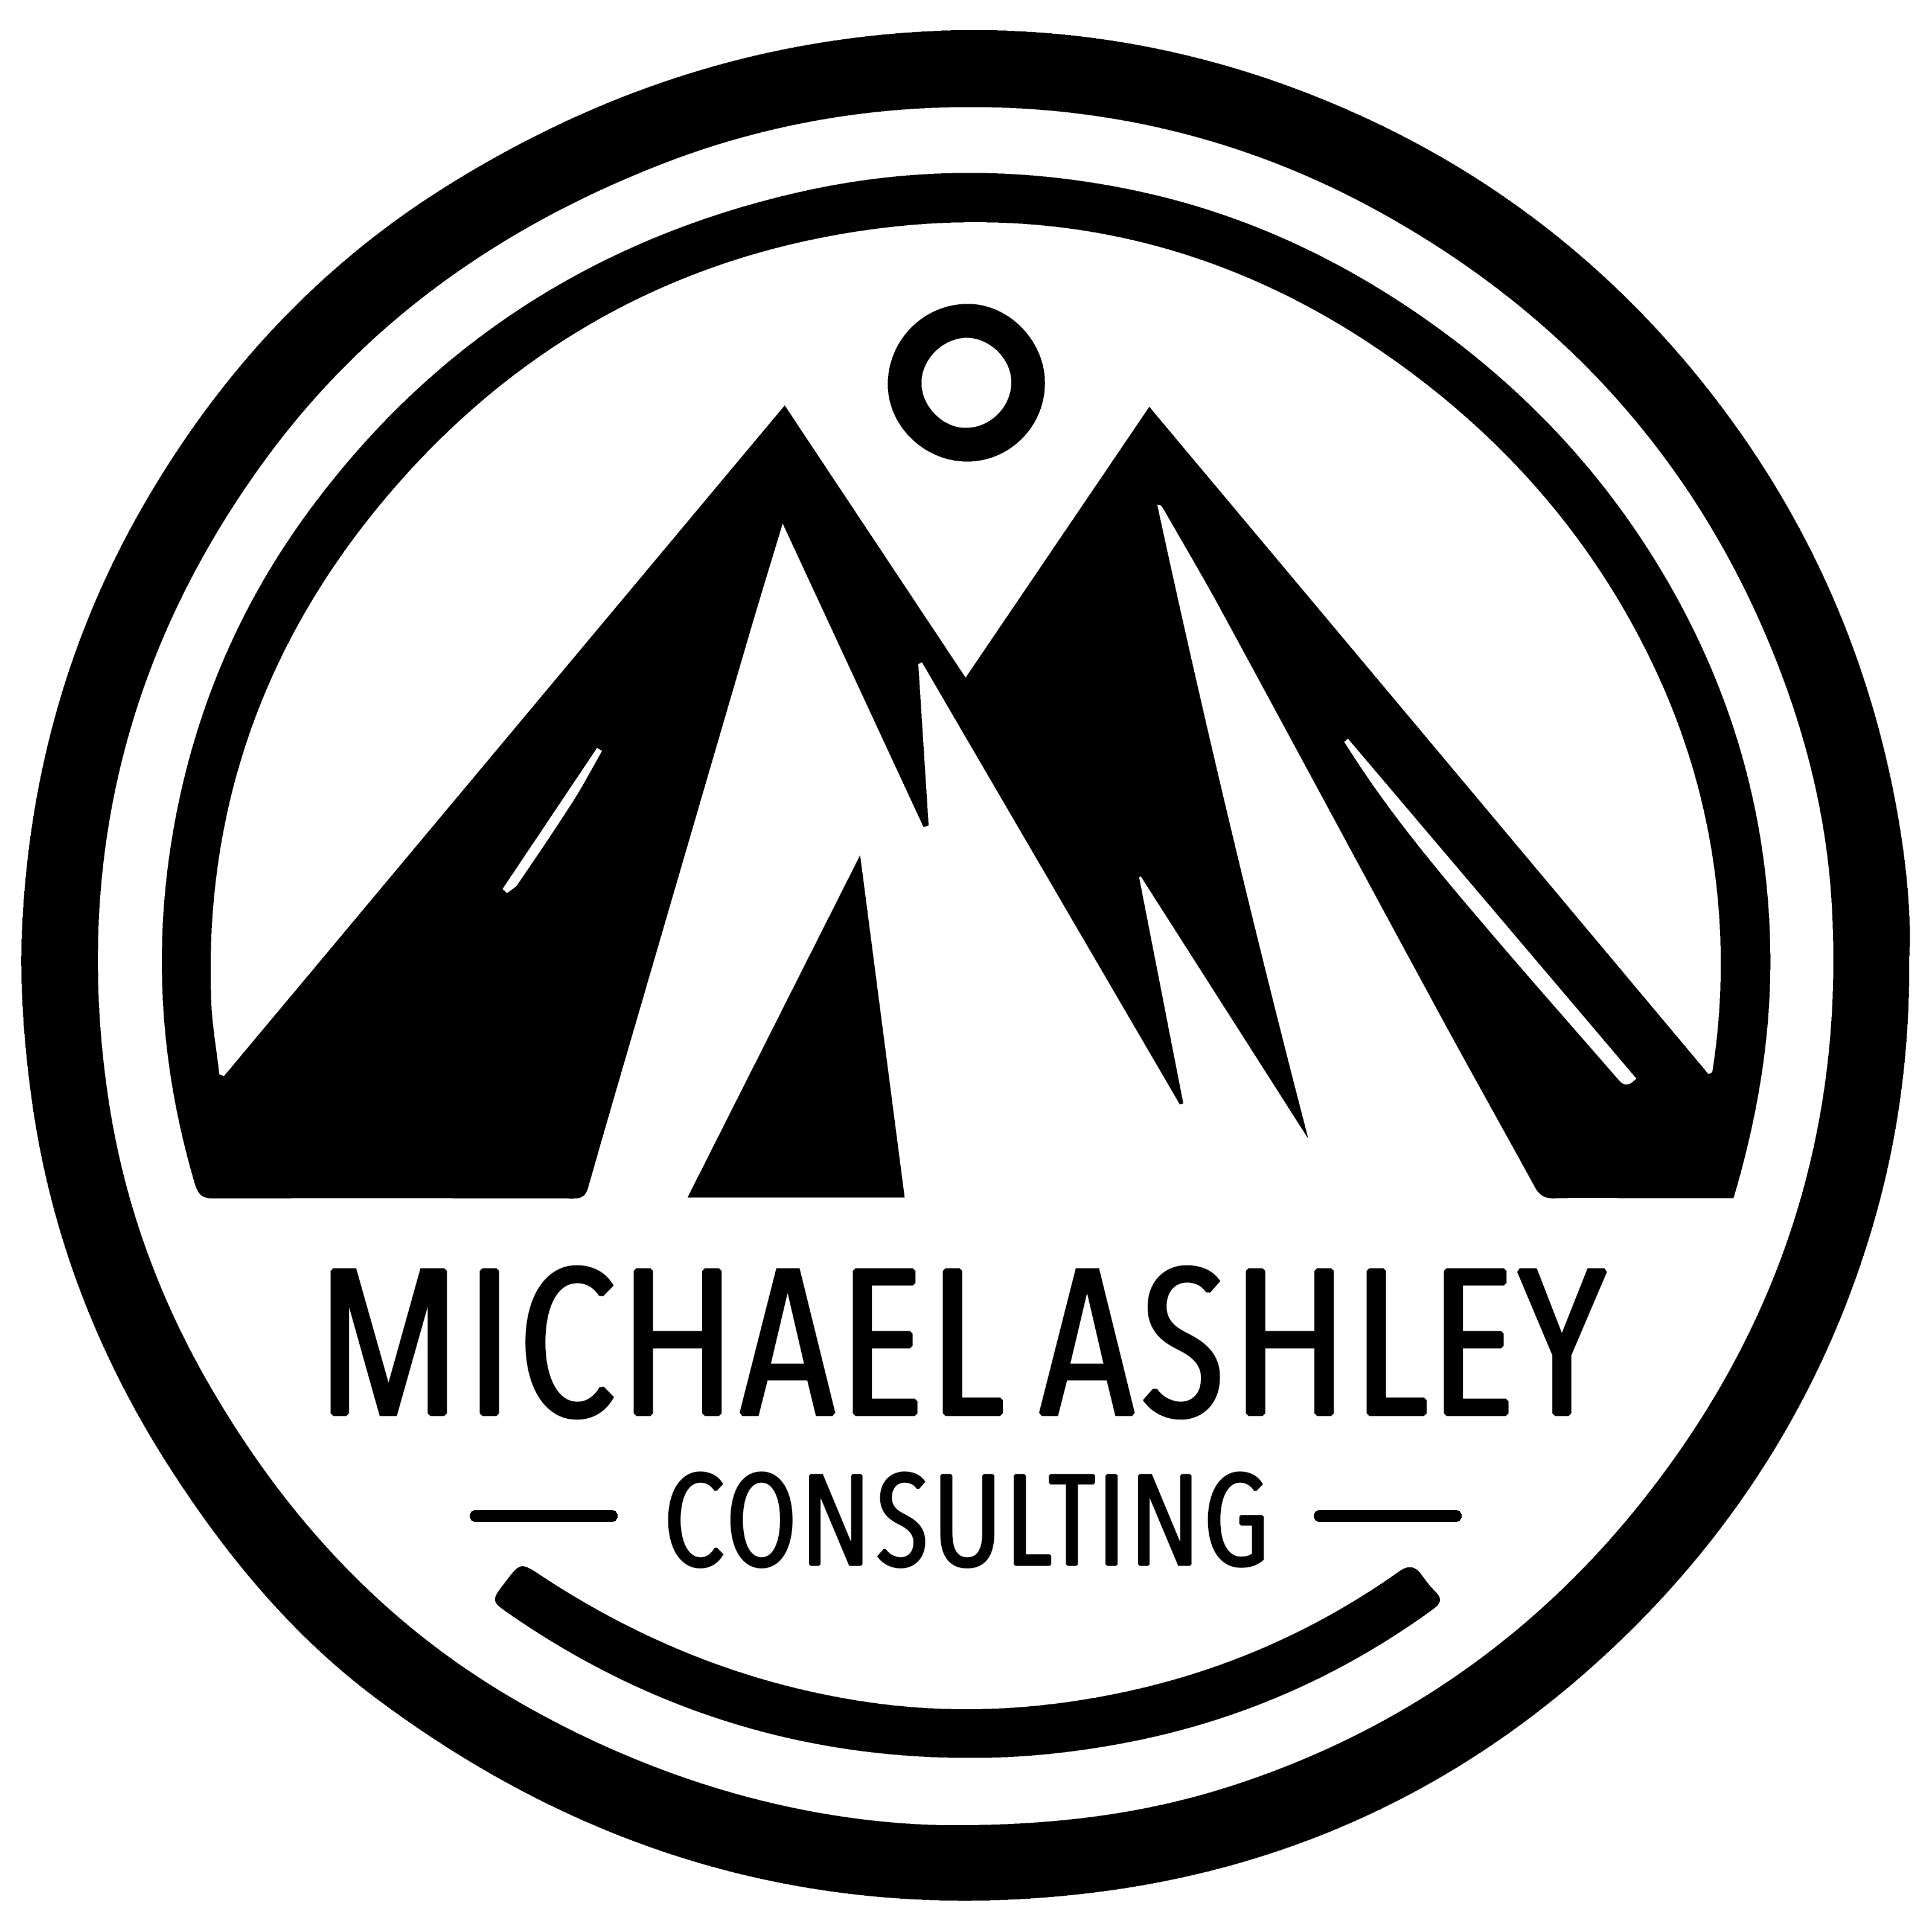 Michael Ashley Consulting